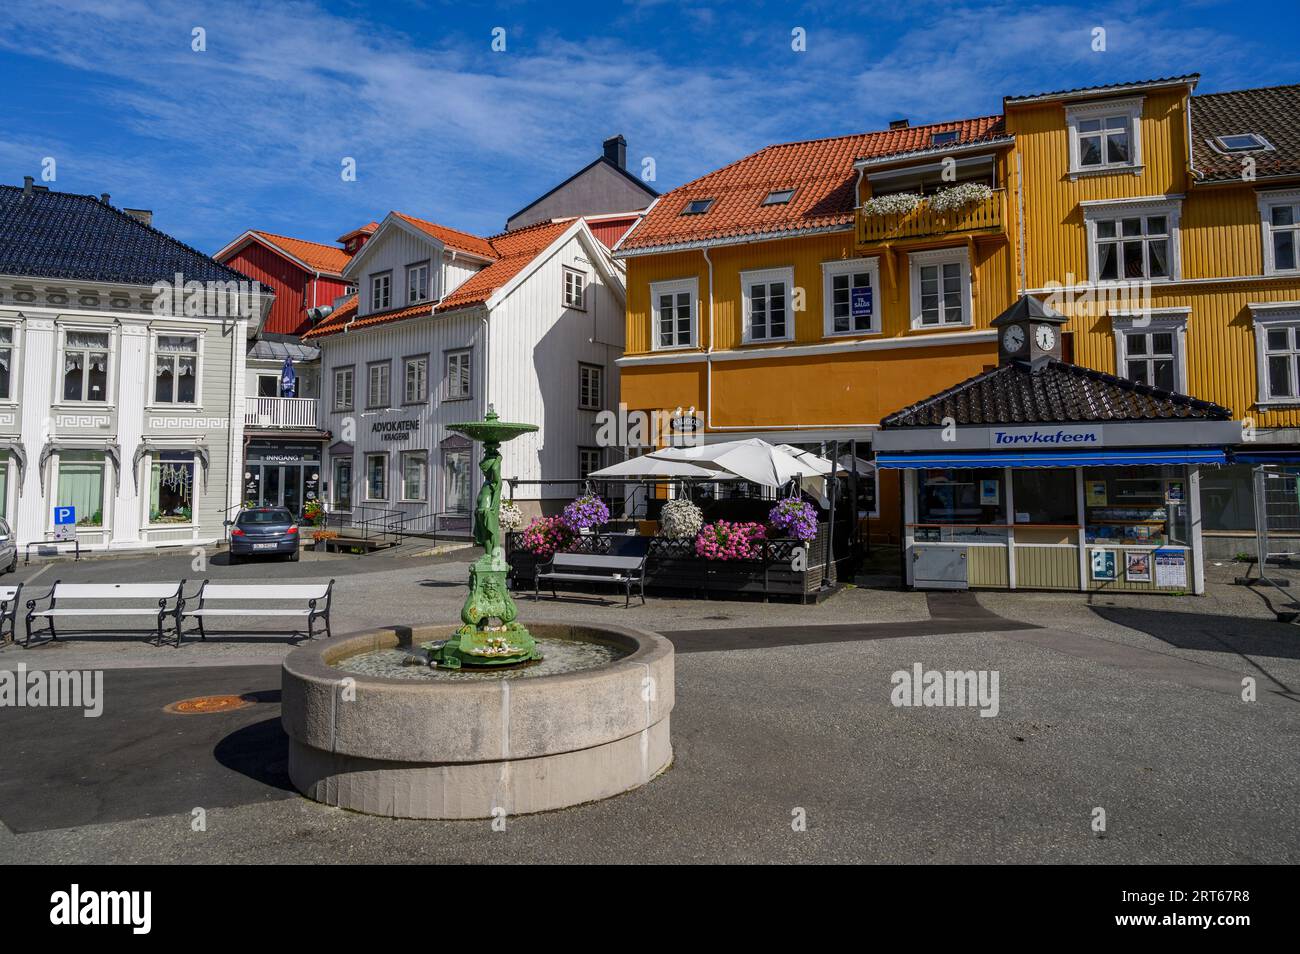 The town square in the well kept and charming seaside town of Kragero on the south coast. Telemark, Norway. Stock Photo